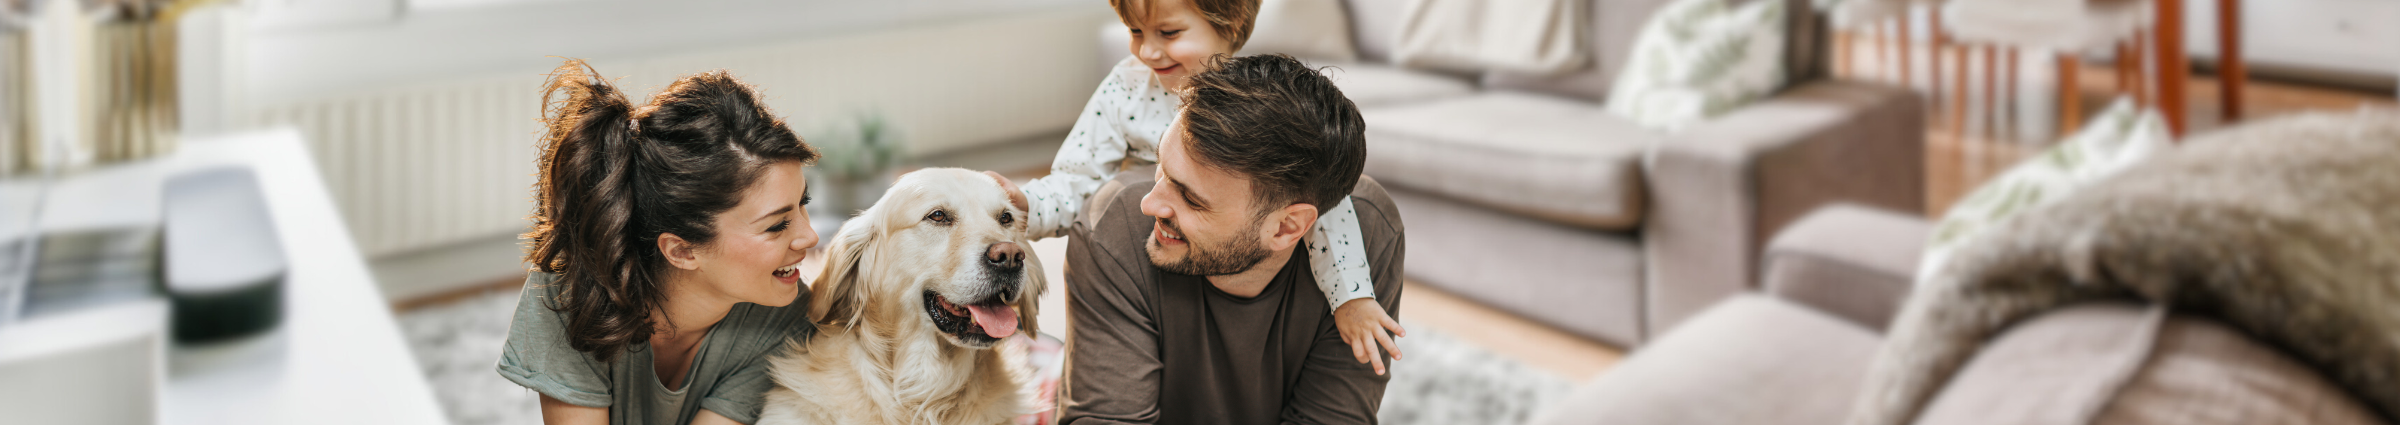 family smiling with dog